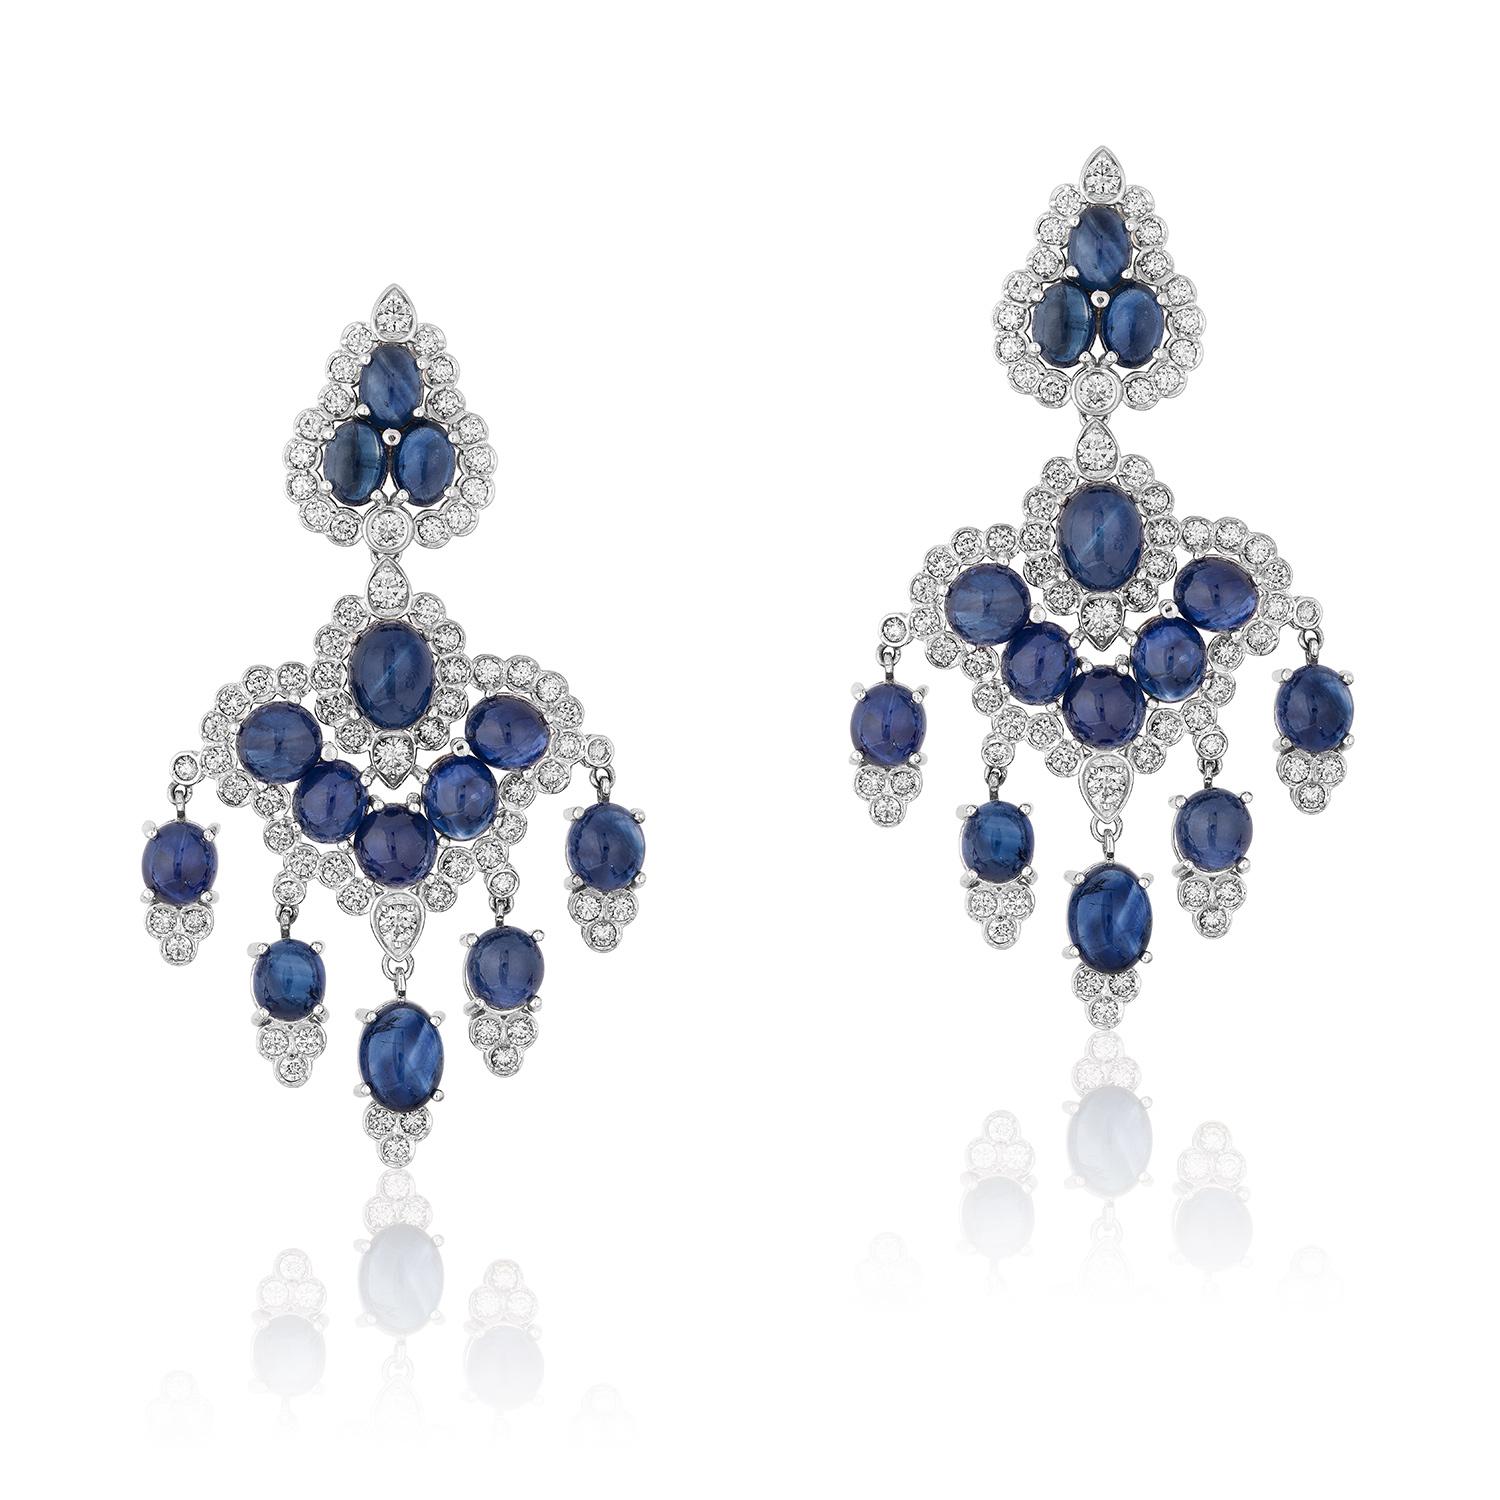 Andreoli Cabochon Blue Sapphire Diamond 18 Karat White Gold Earrings

These earrings feature:
- 5.39 Carat Diamond
- 54.77 Carat Cabochon Blue Sapphire
- 34.42 Gram 18K White Gold
- Made In Italy